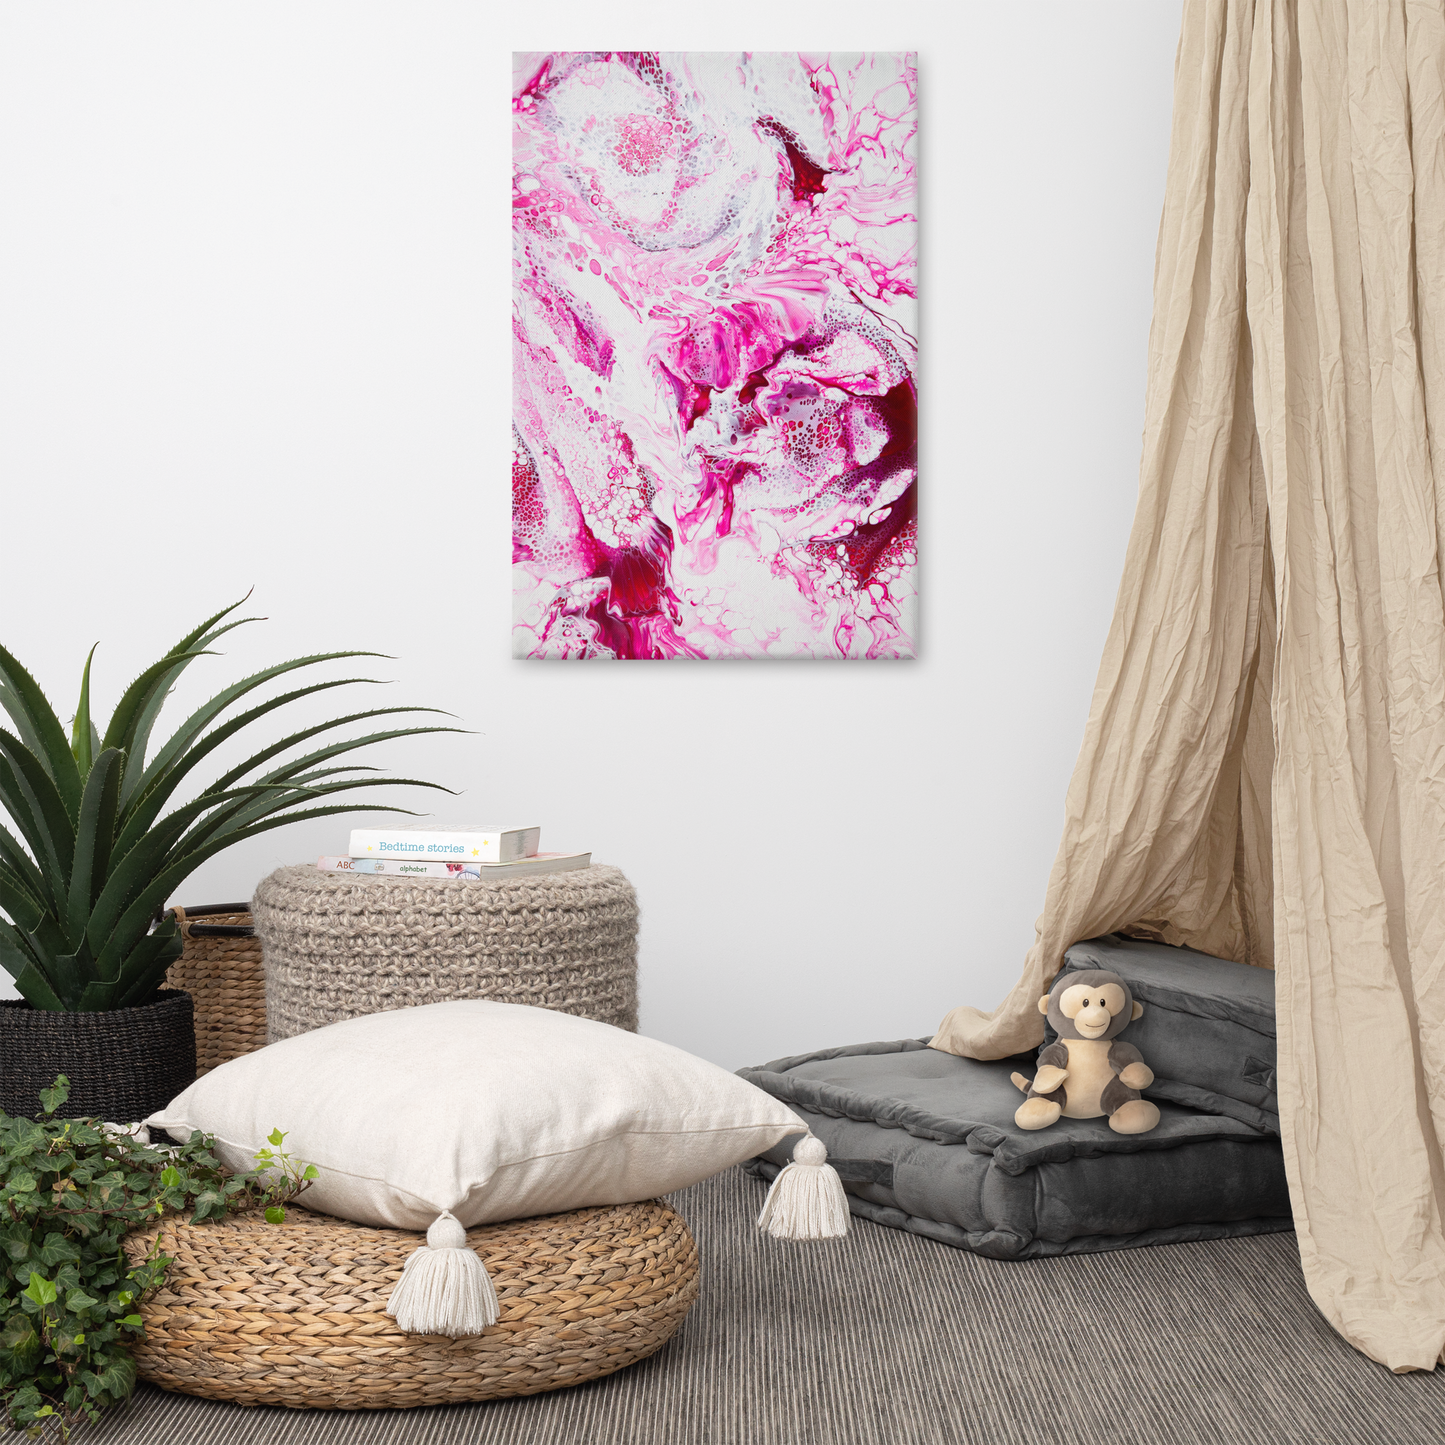 NightOwl Studio Abstract Wall Art, Pink Distortion, Boho Living Room, Bedroom, Office, and Home Decor, Premium Canvas with Wooden Frame, Acrylic Painting Reproduction, 24” x 36”